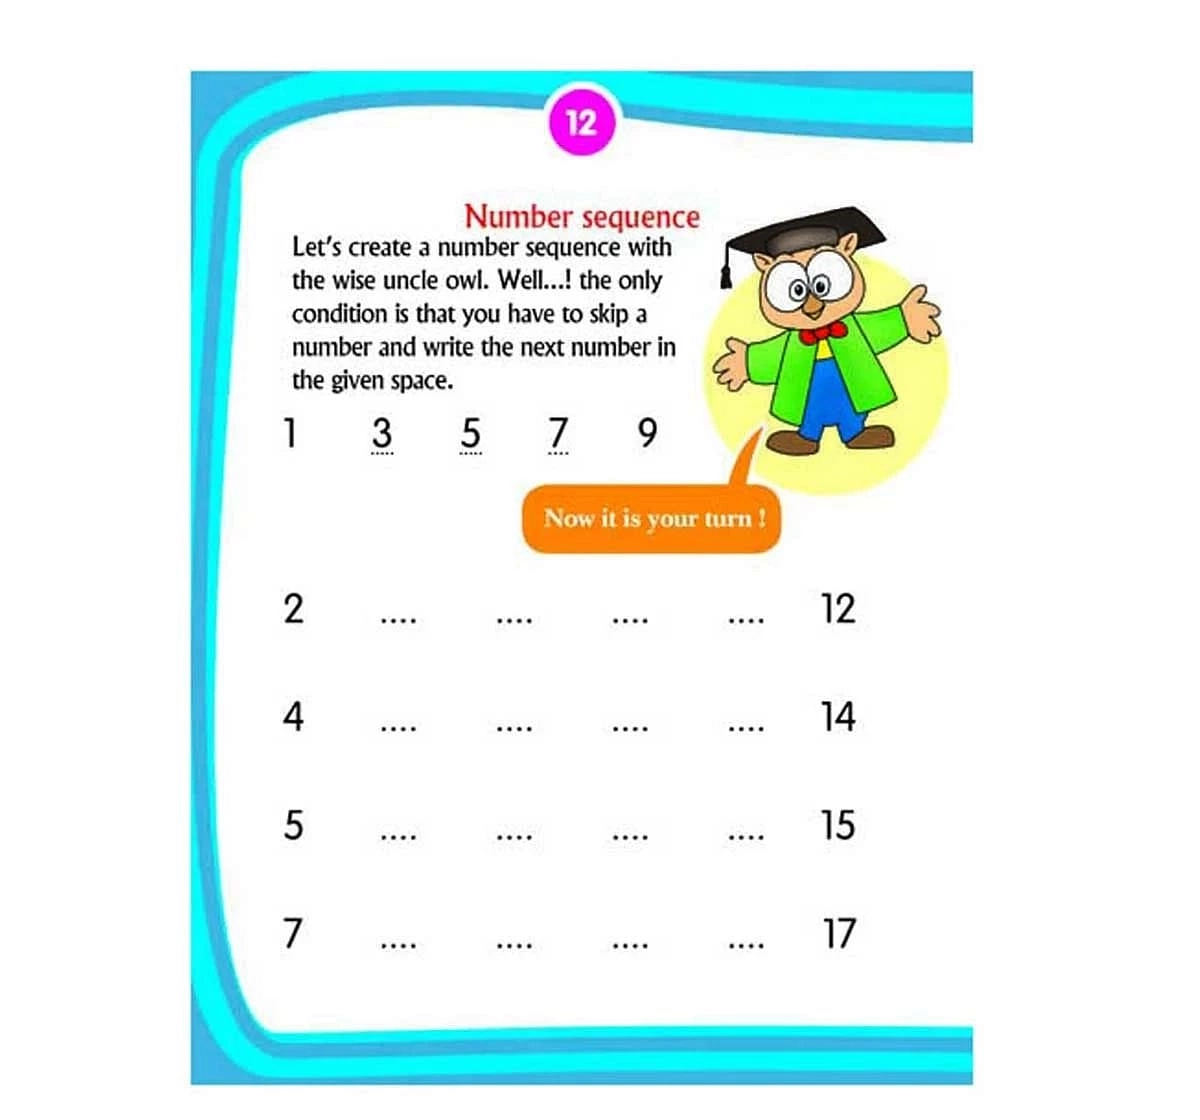 Dreamland Paper Back 1st Maths Activity Book for kids 3Y+, Multicolour